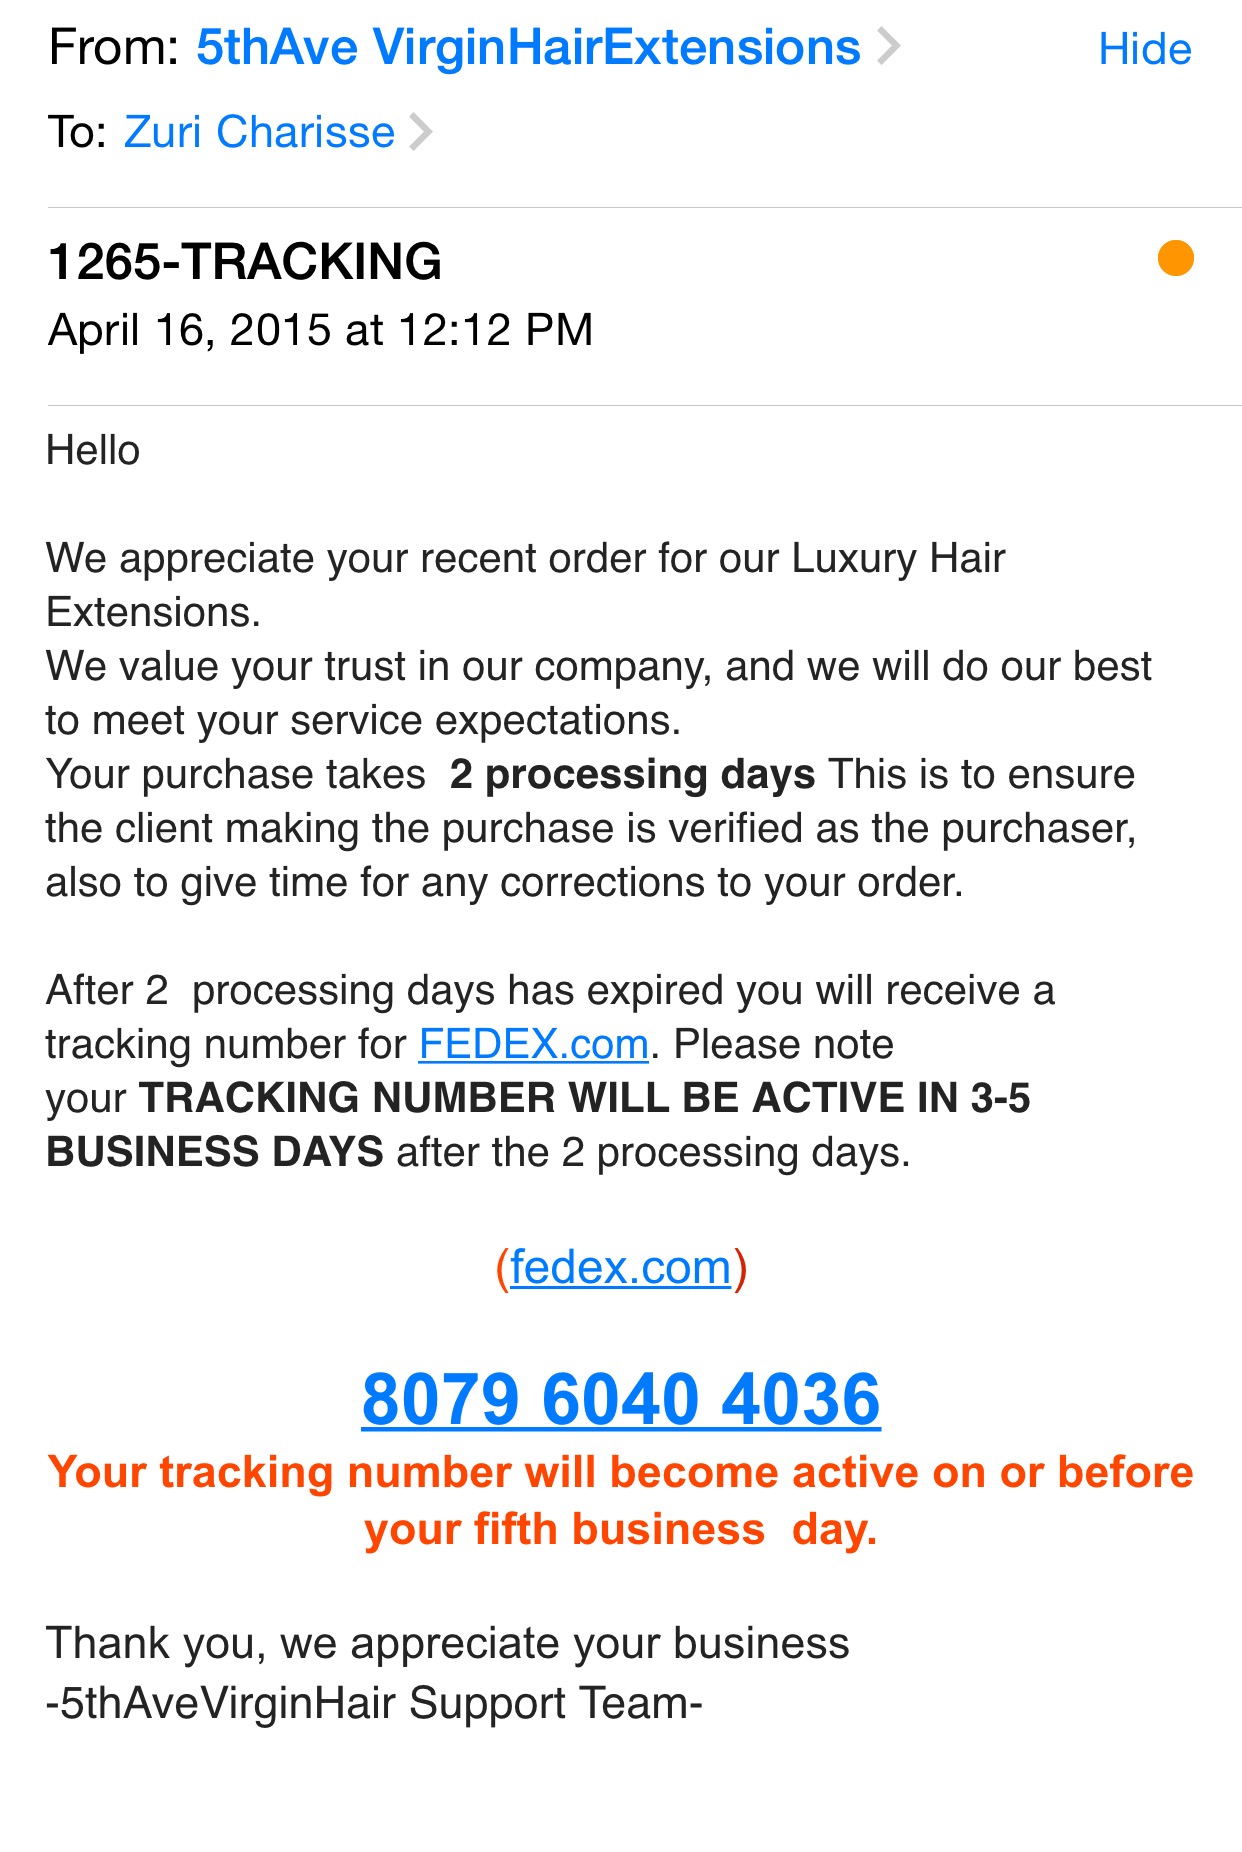 received tracking